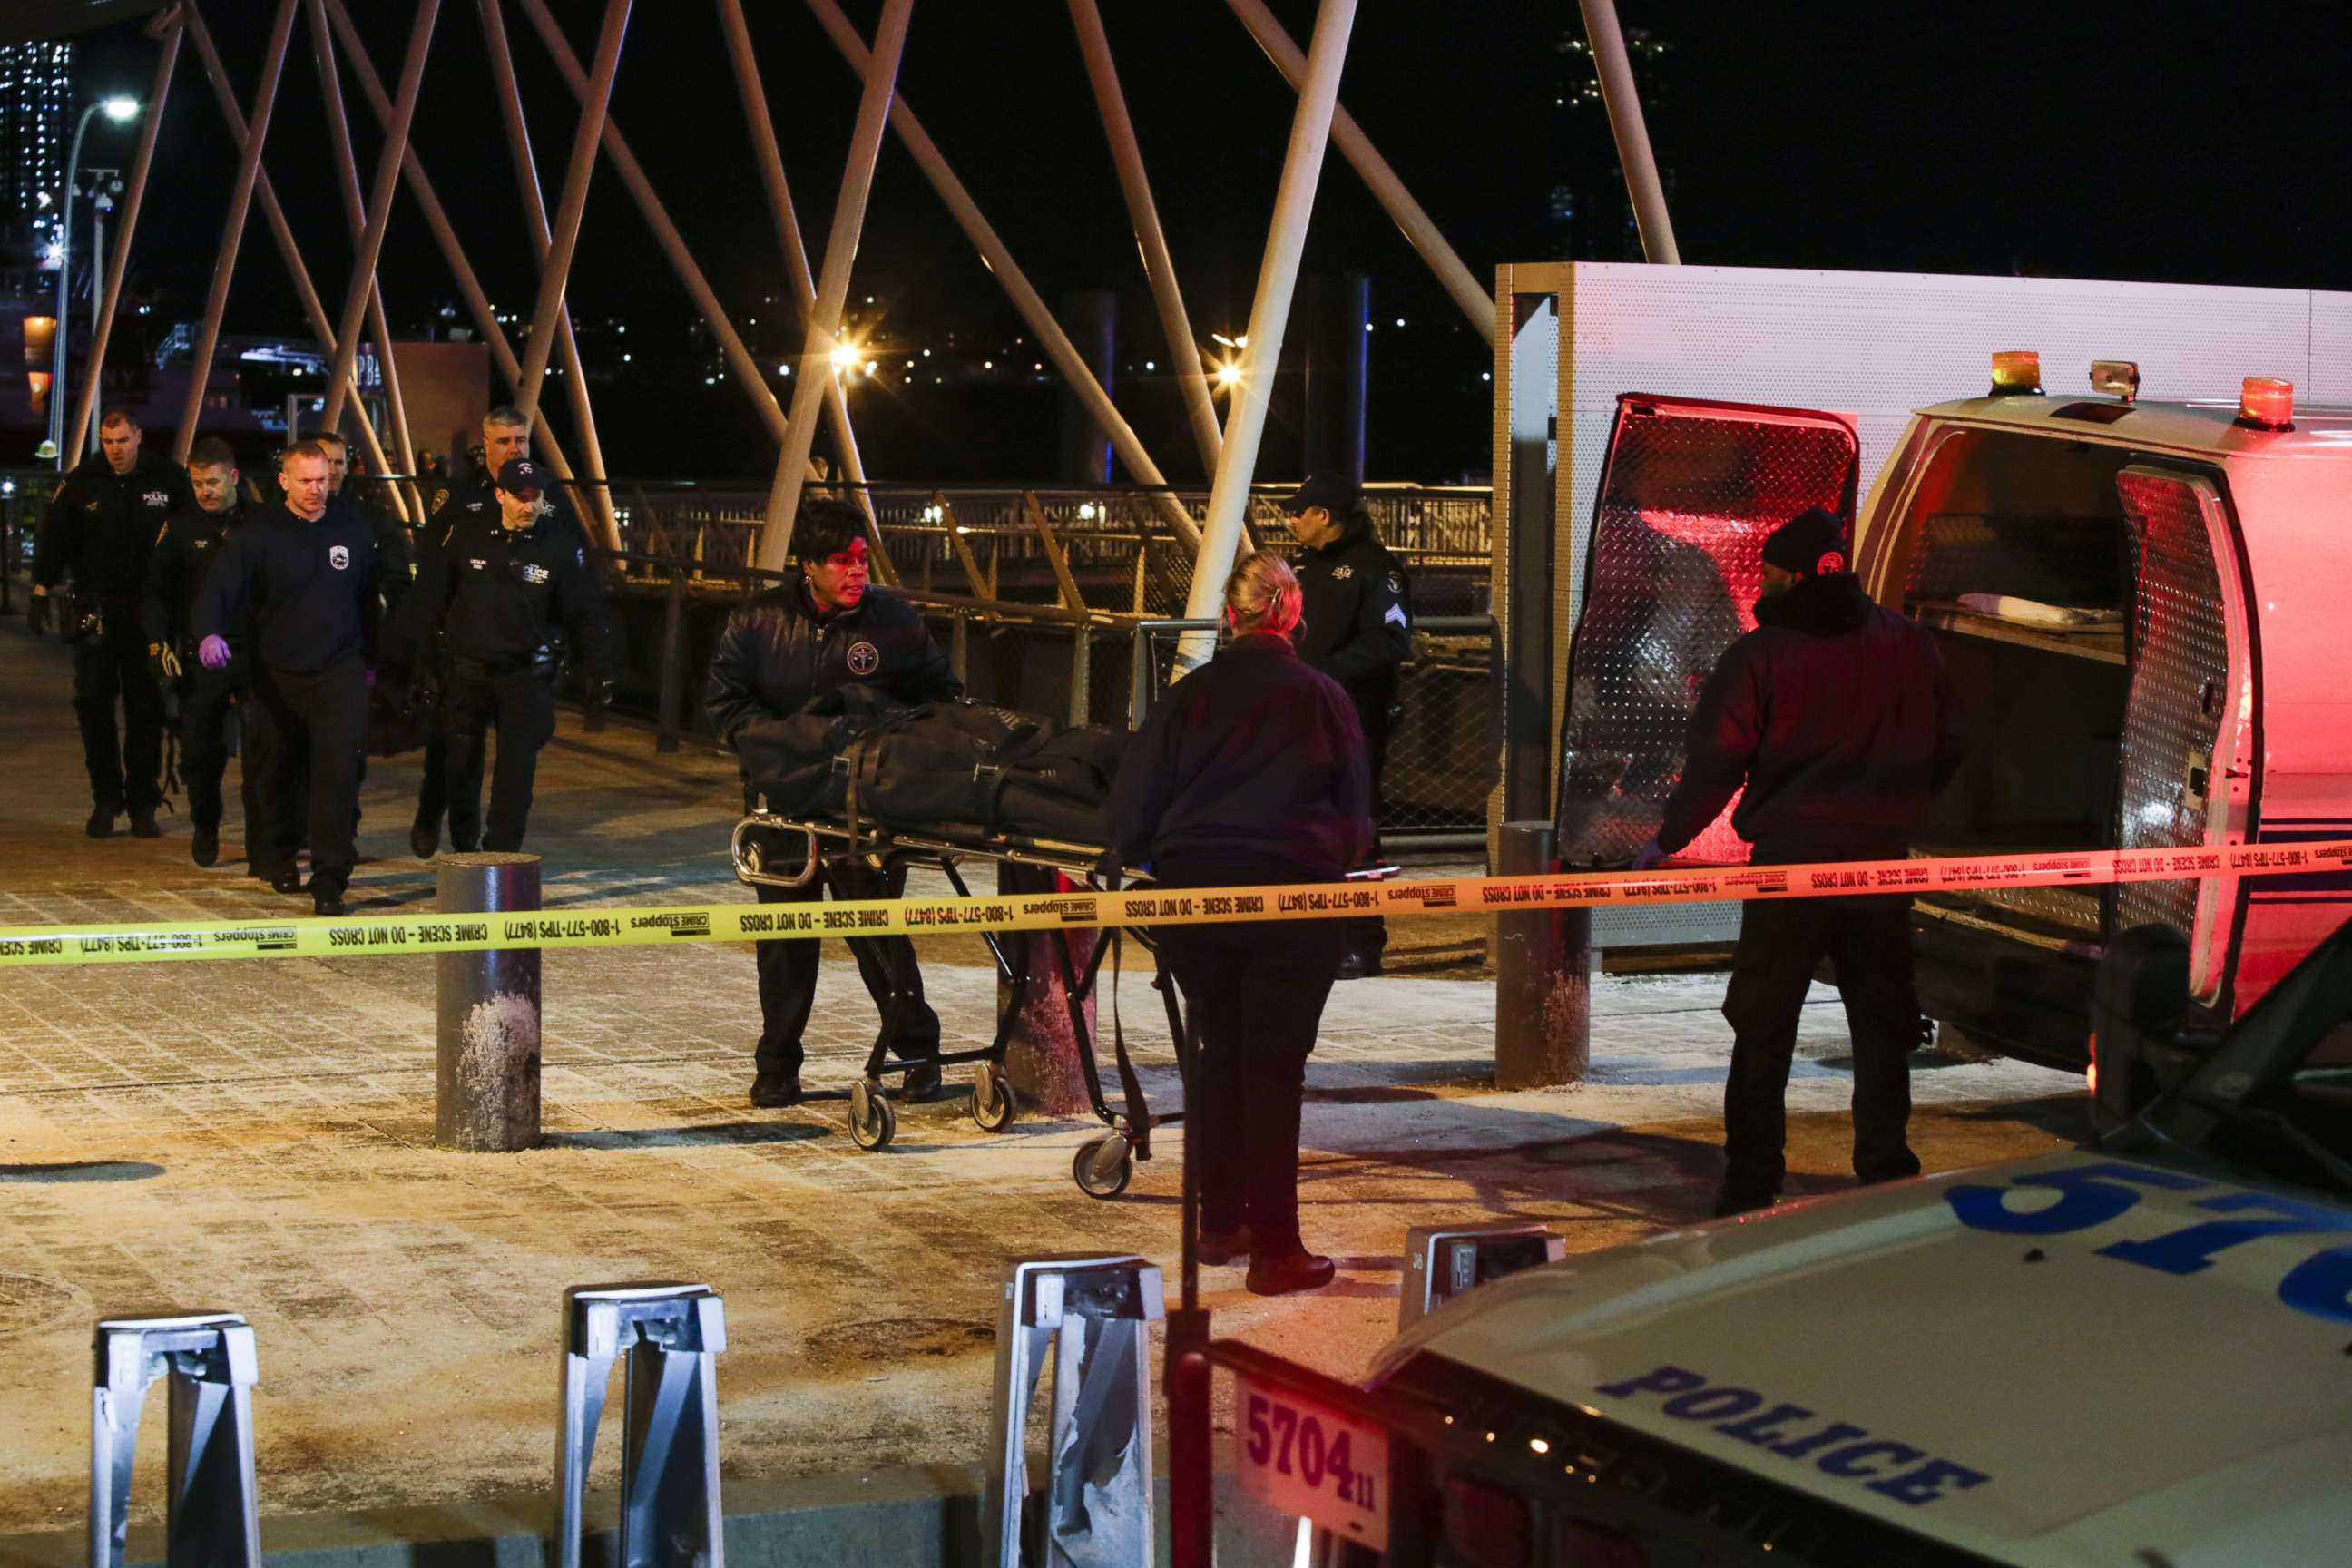 PHOTO: NYPD officers remove bodies from the scene of a helicopter crash in the East River on March 11, 2018 in New York.